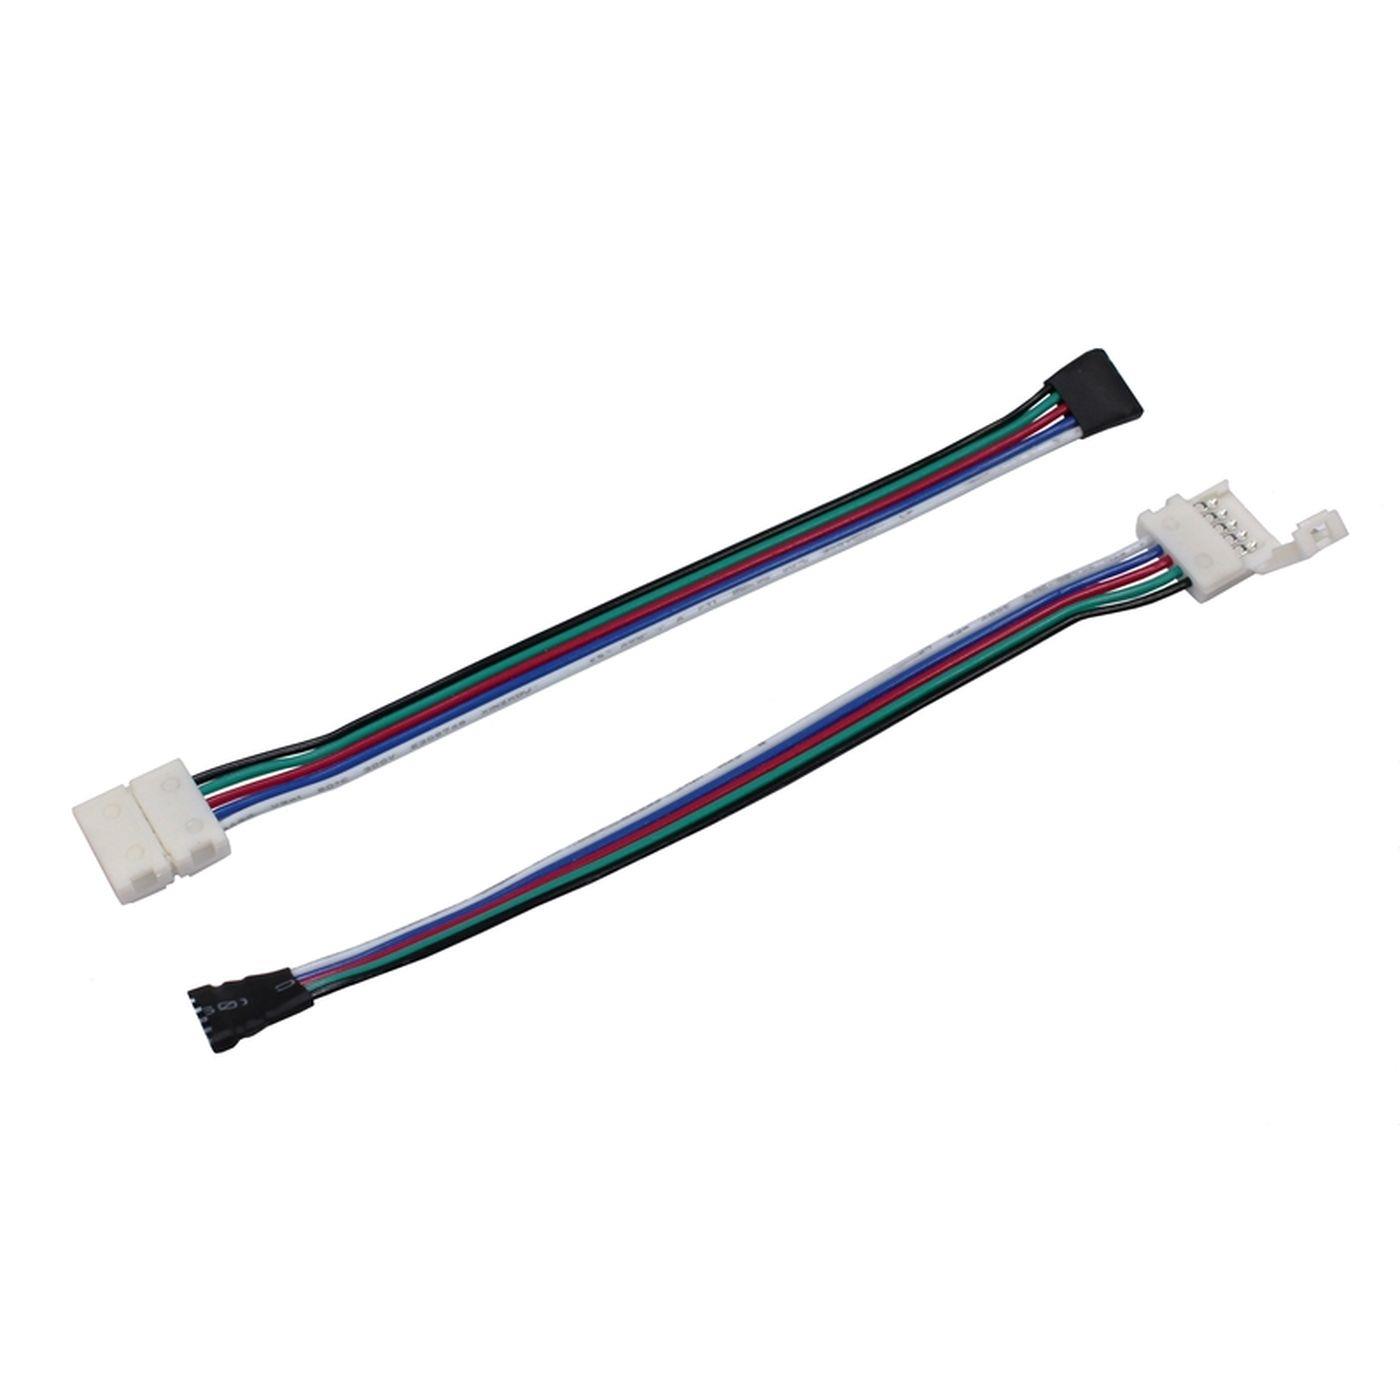 17cm RGBW LED Connector -> Clip Quick connector 5 Pin Socket -> Clip for 10mm RGBW LED Strip 15x5mm